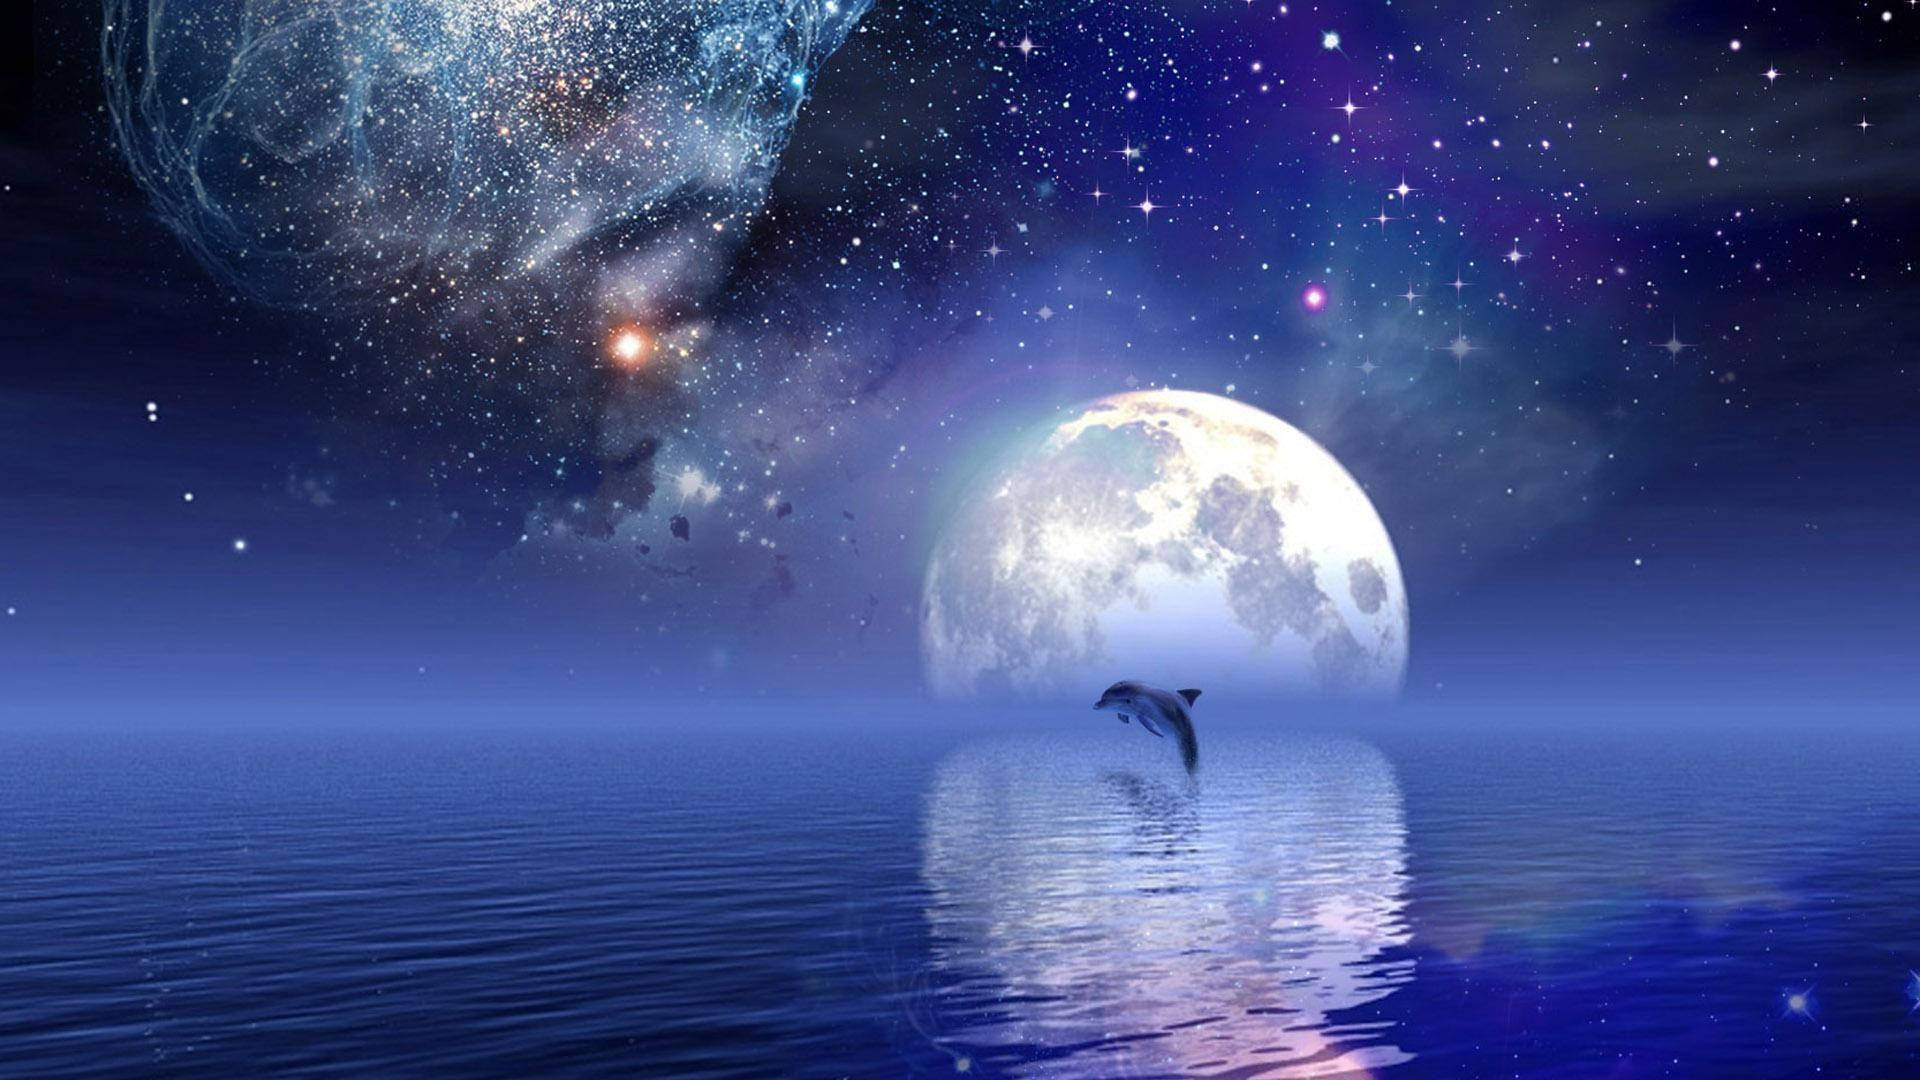 Beautiful Cool Dolphin Jumping Out Of Ocean Wallpaper